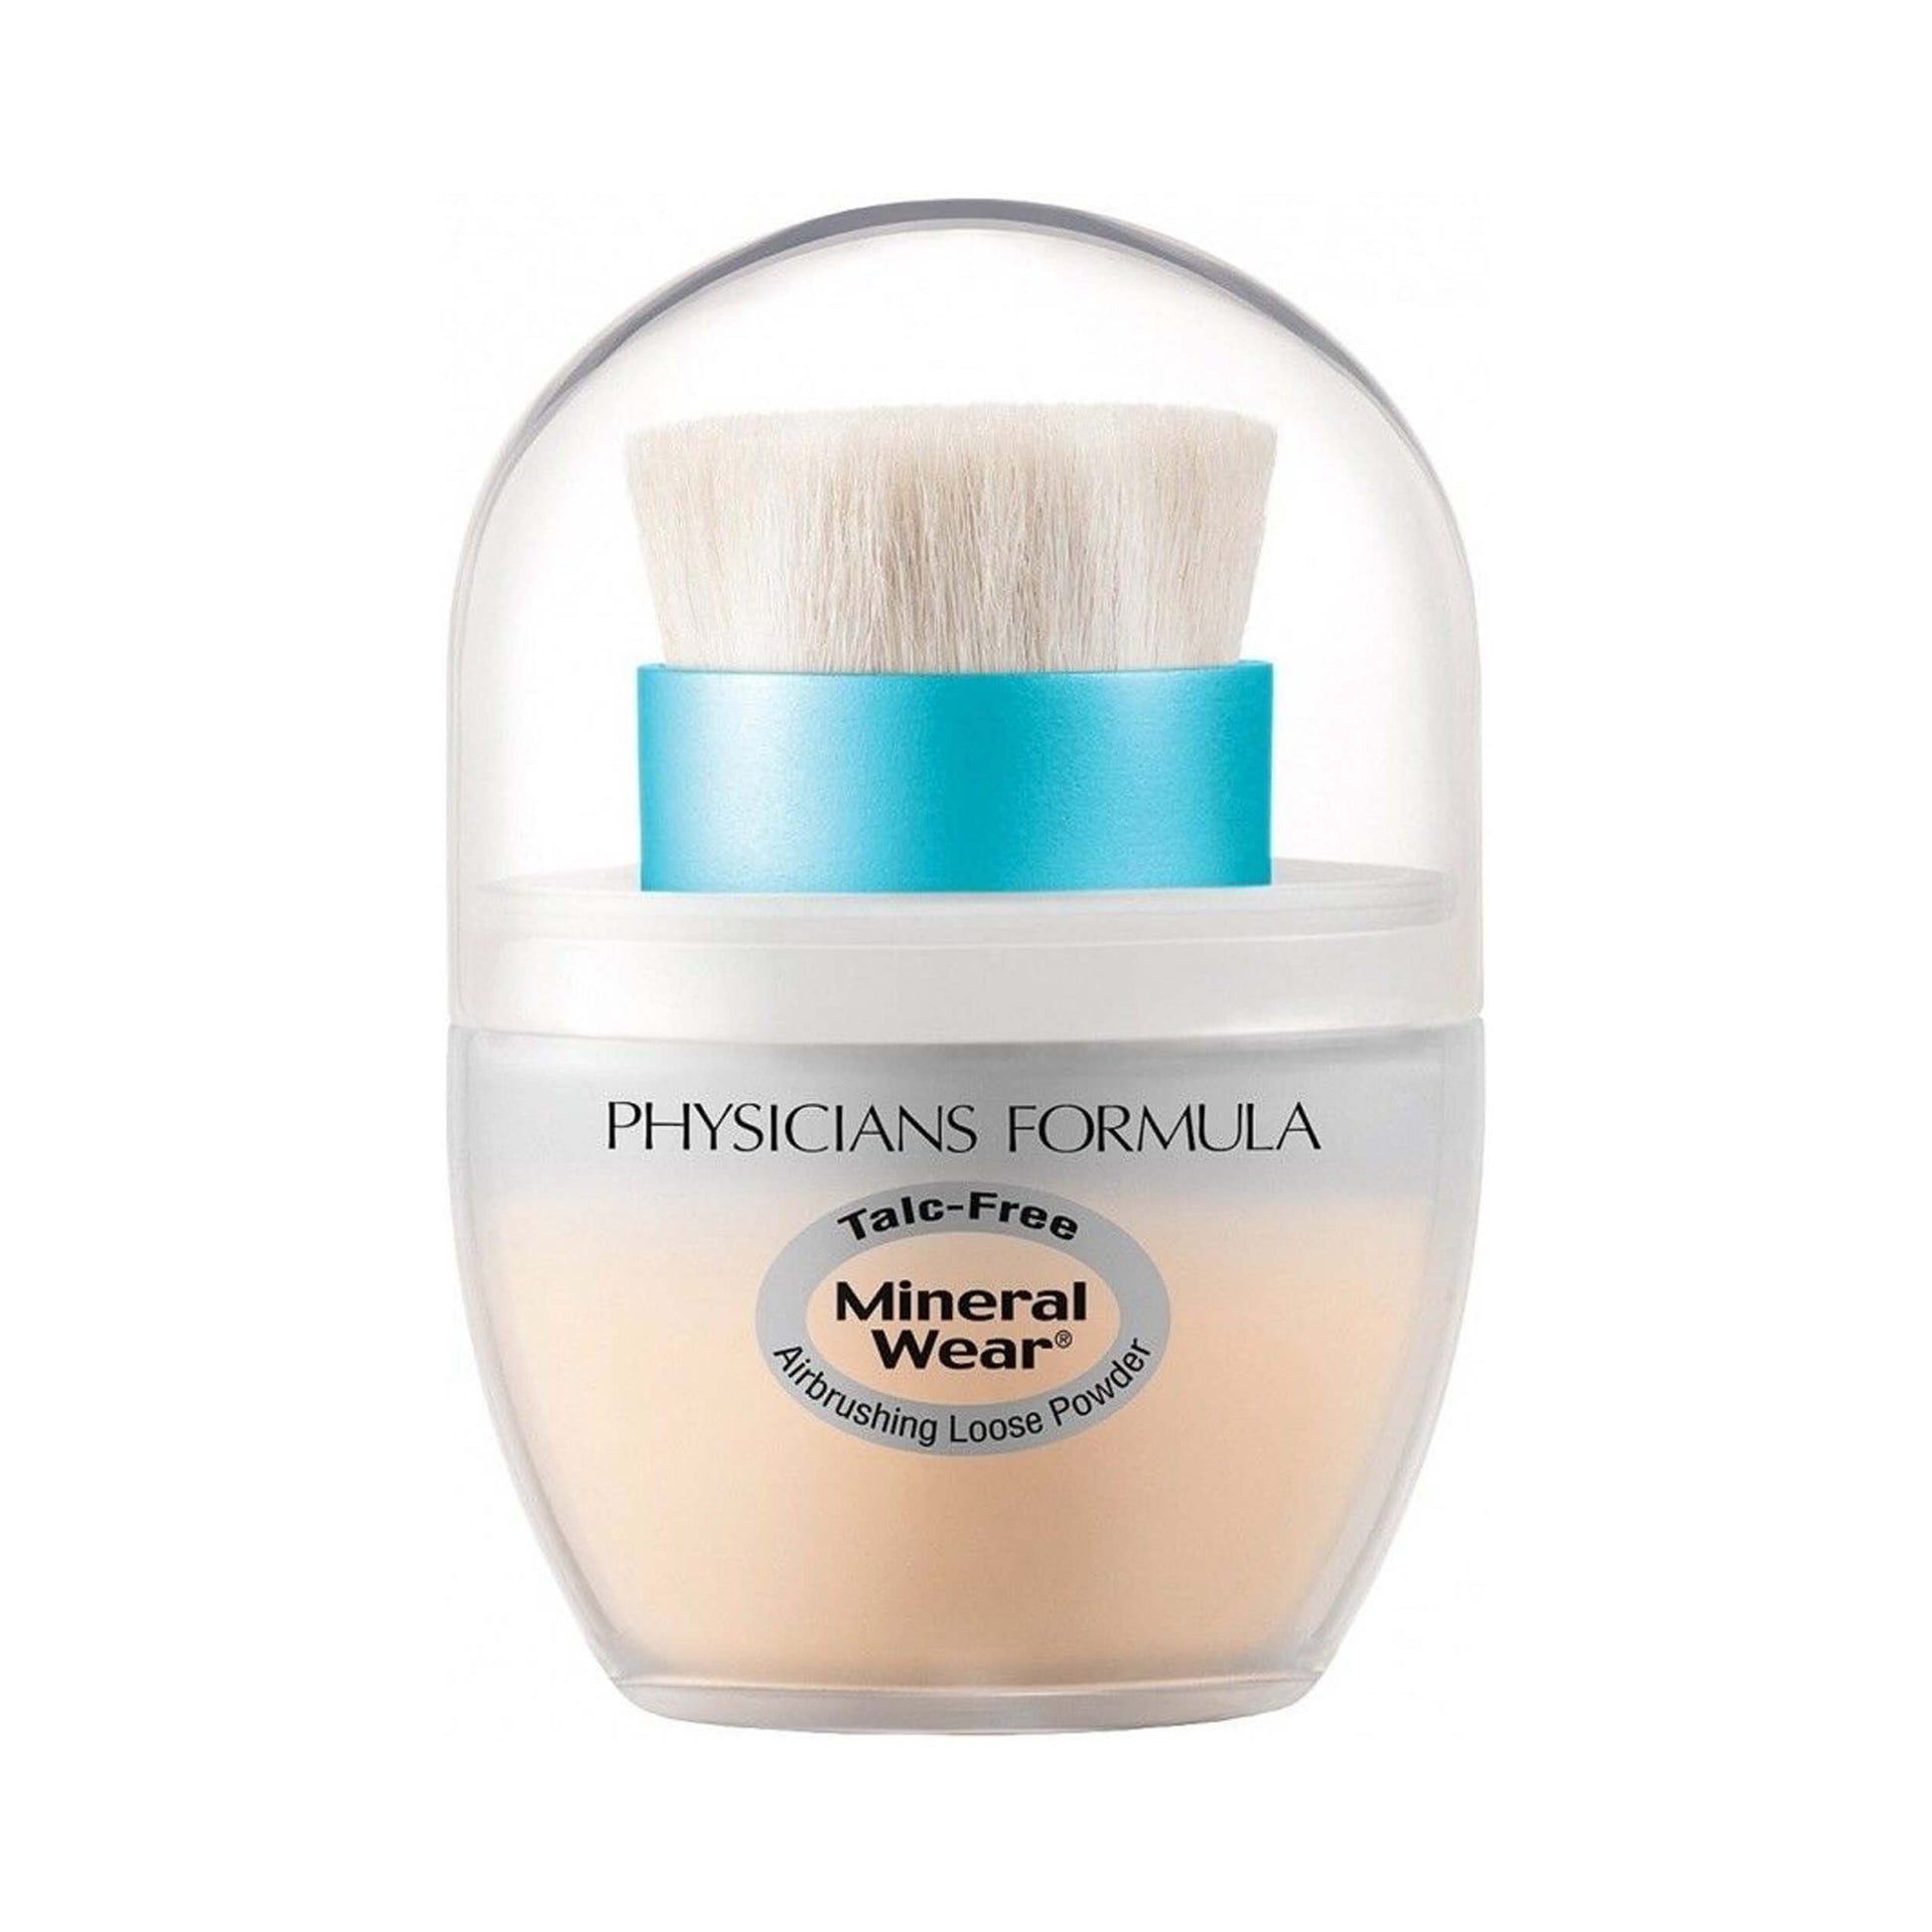 Physicians Formula Mineral Wear Talc-Free Mineral Airbrushing Loose Face Powder SPF 30 Creamy Natural